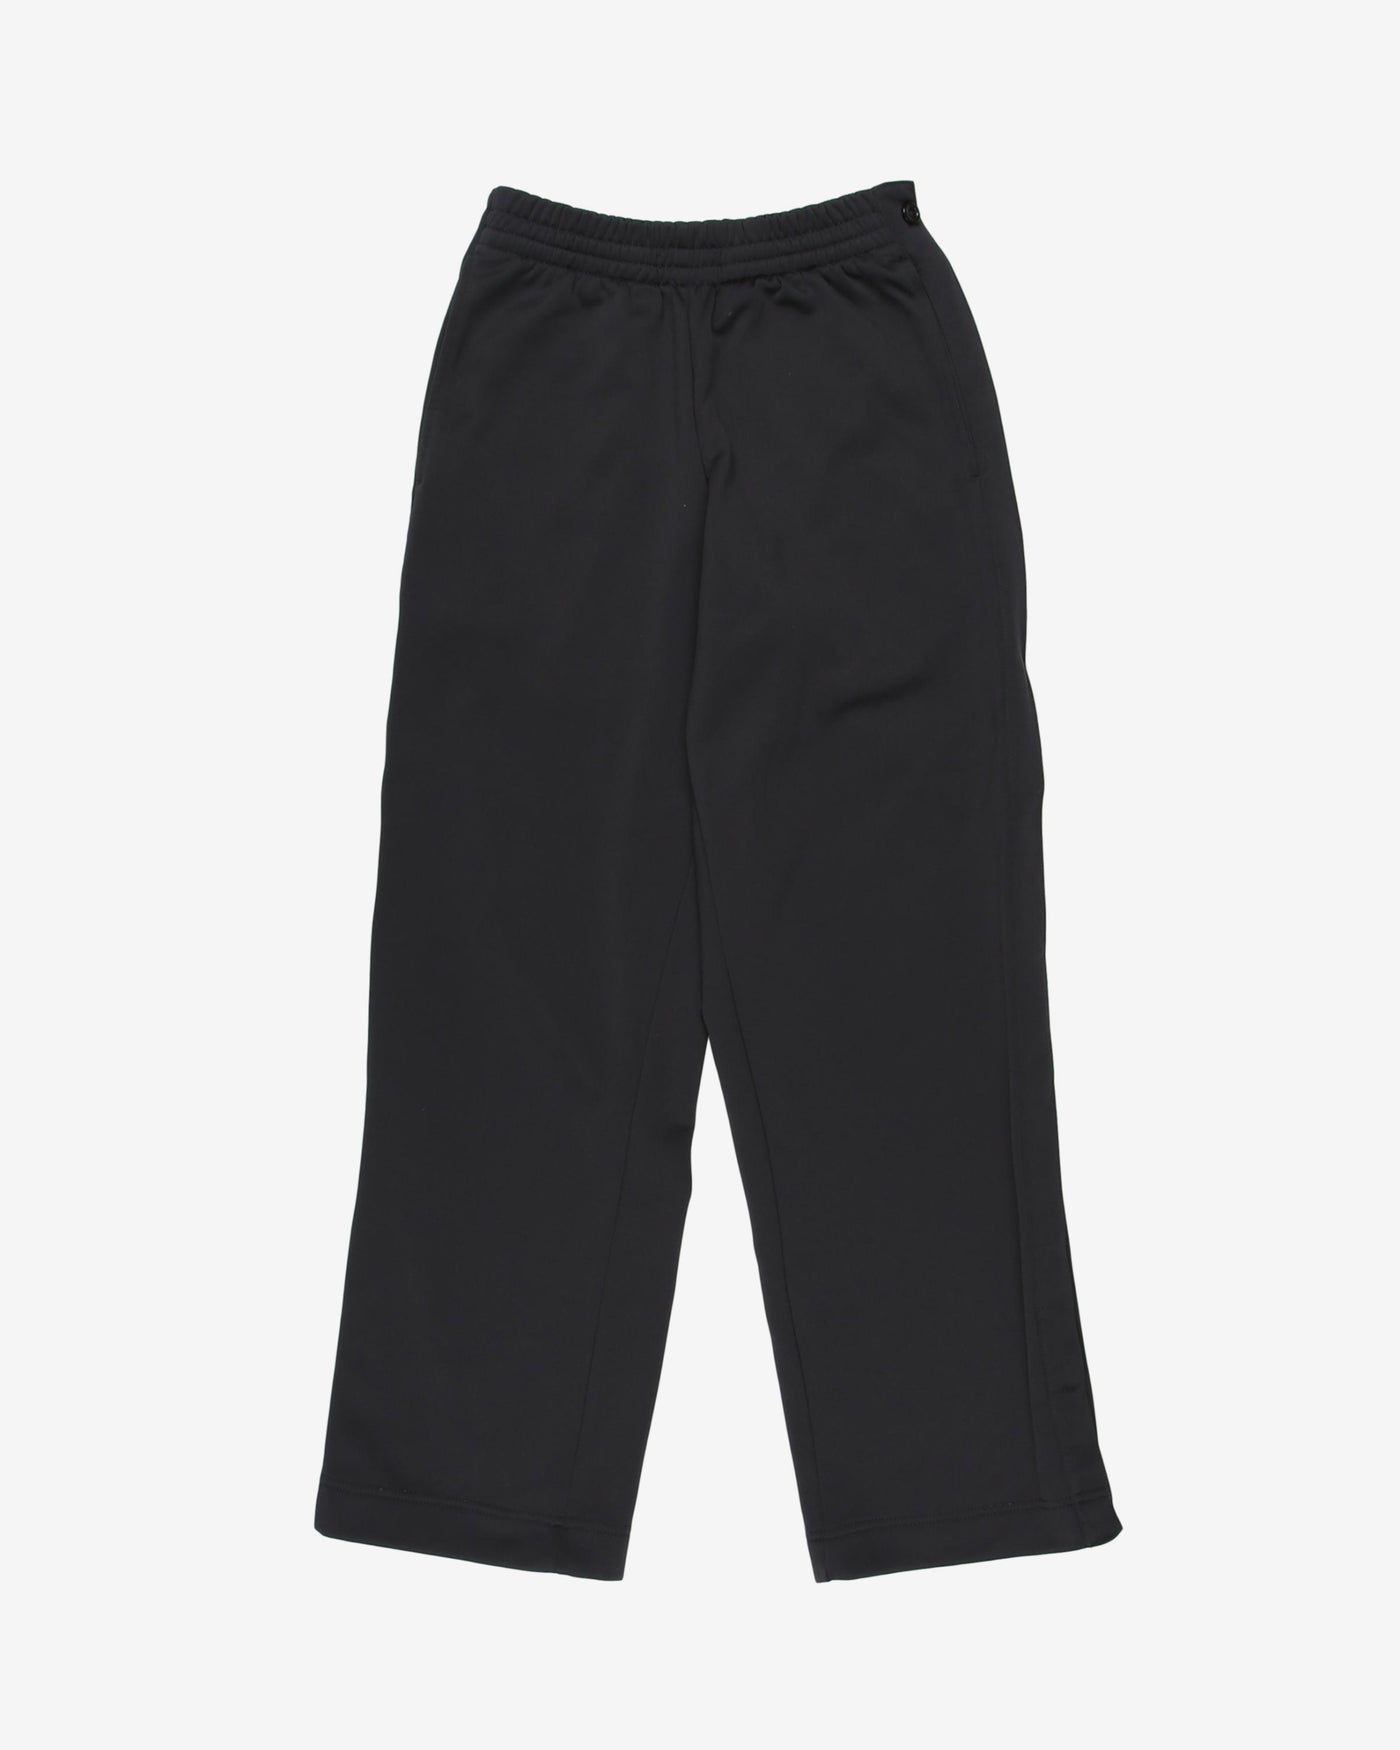 champs grey popper track trousers -xs w24